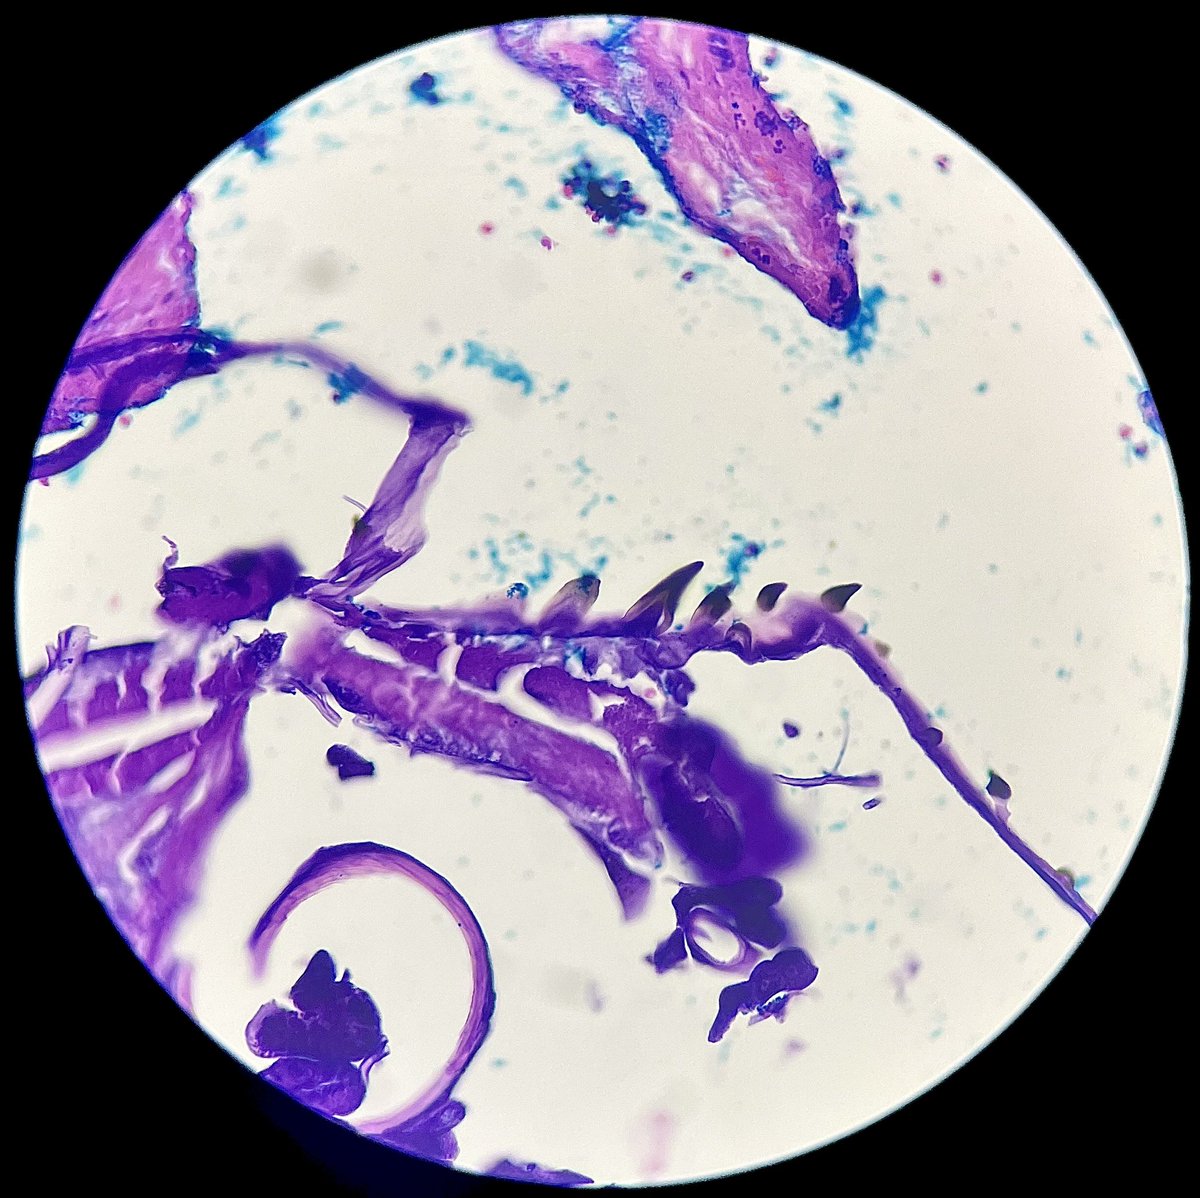 Male, 37 yo, ulcer on the right hand and… something seems to be moving. Knock knock who’s there? 👀 

PS: The horns are the clue 🔎

#CrittersOnTwitter #pathart #dermpath #dermpath #pathresidents #pathology #path